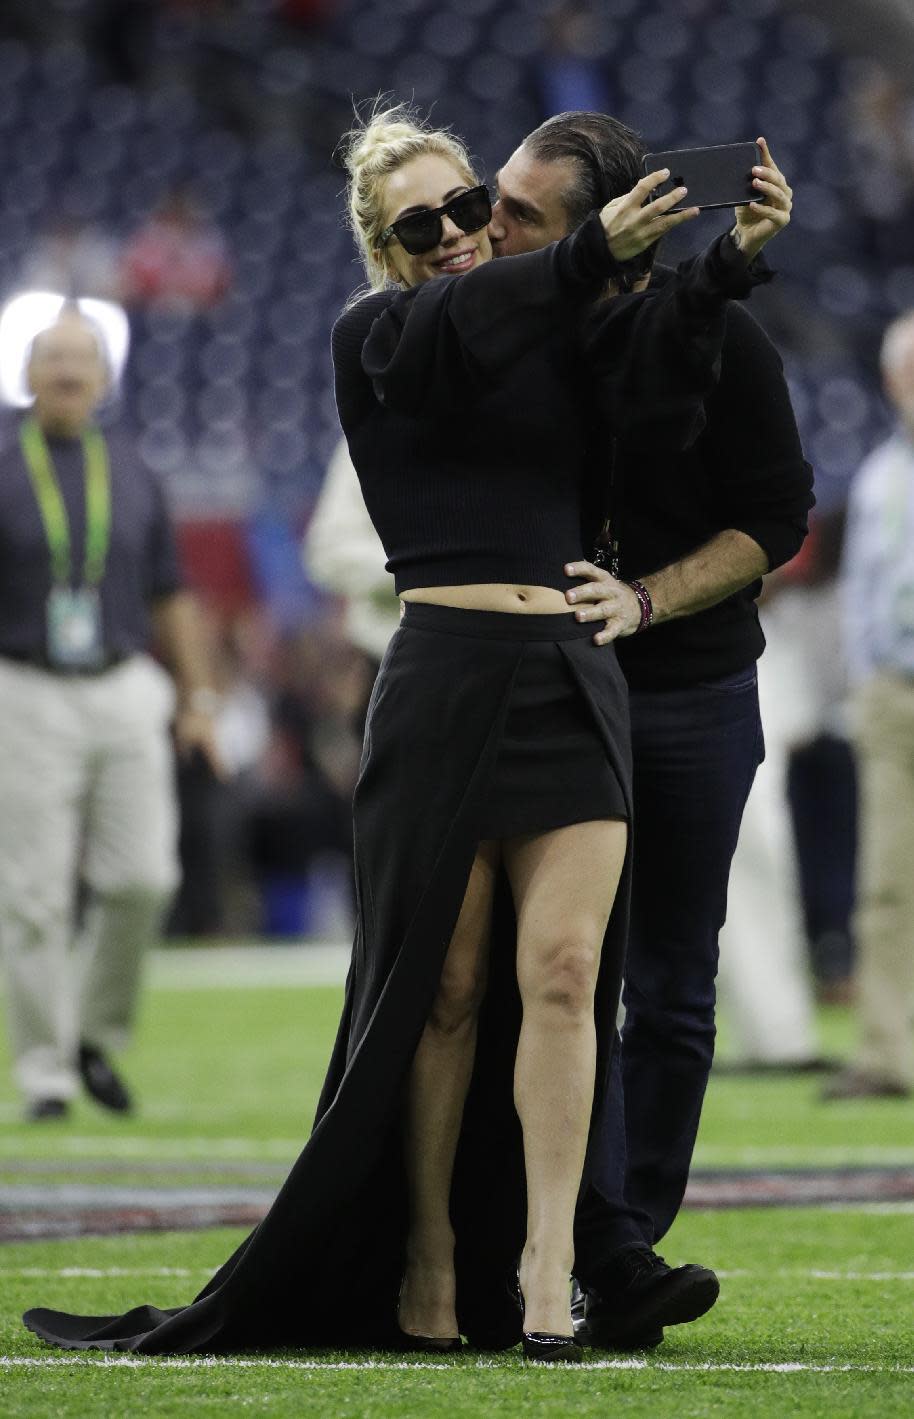 Lady Gaga takes a selfie with Christian Carino before the NFL Super Bowl 51 football game between the New England Patriots and the Atlanta Falcons, Sunday, Feb. 5, 2017, in Houston. (AP Photo/Jae C. Hong)